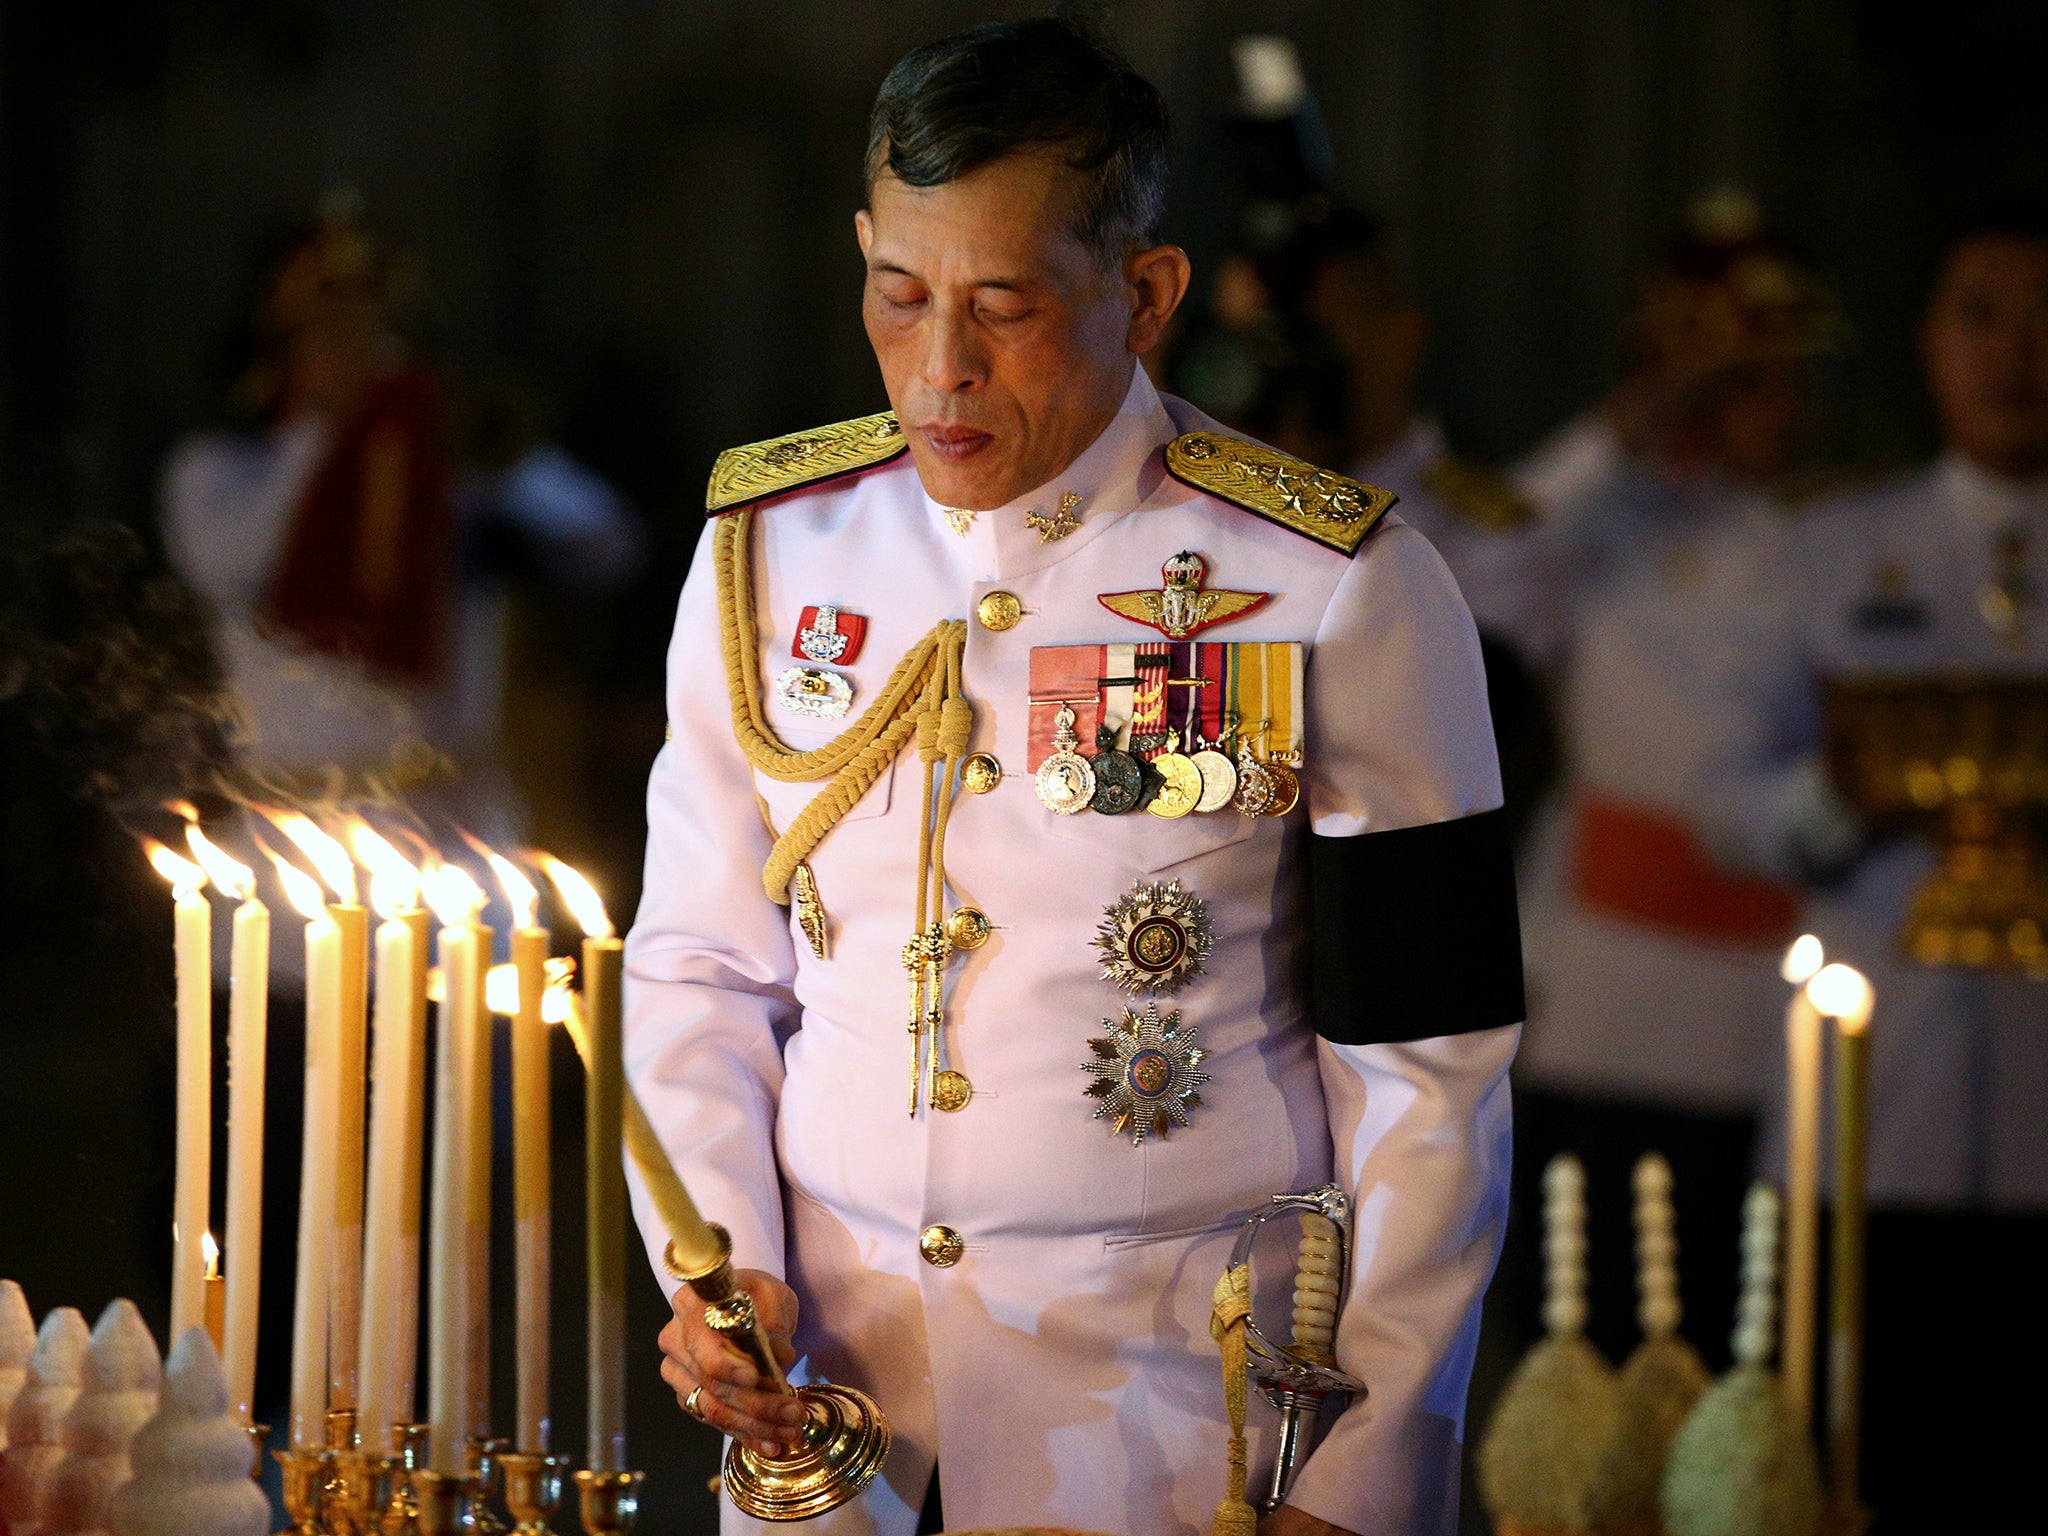 Crown Prince Maha Vajiralongkorn has been the named successor to Bhumibol for more than four decades